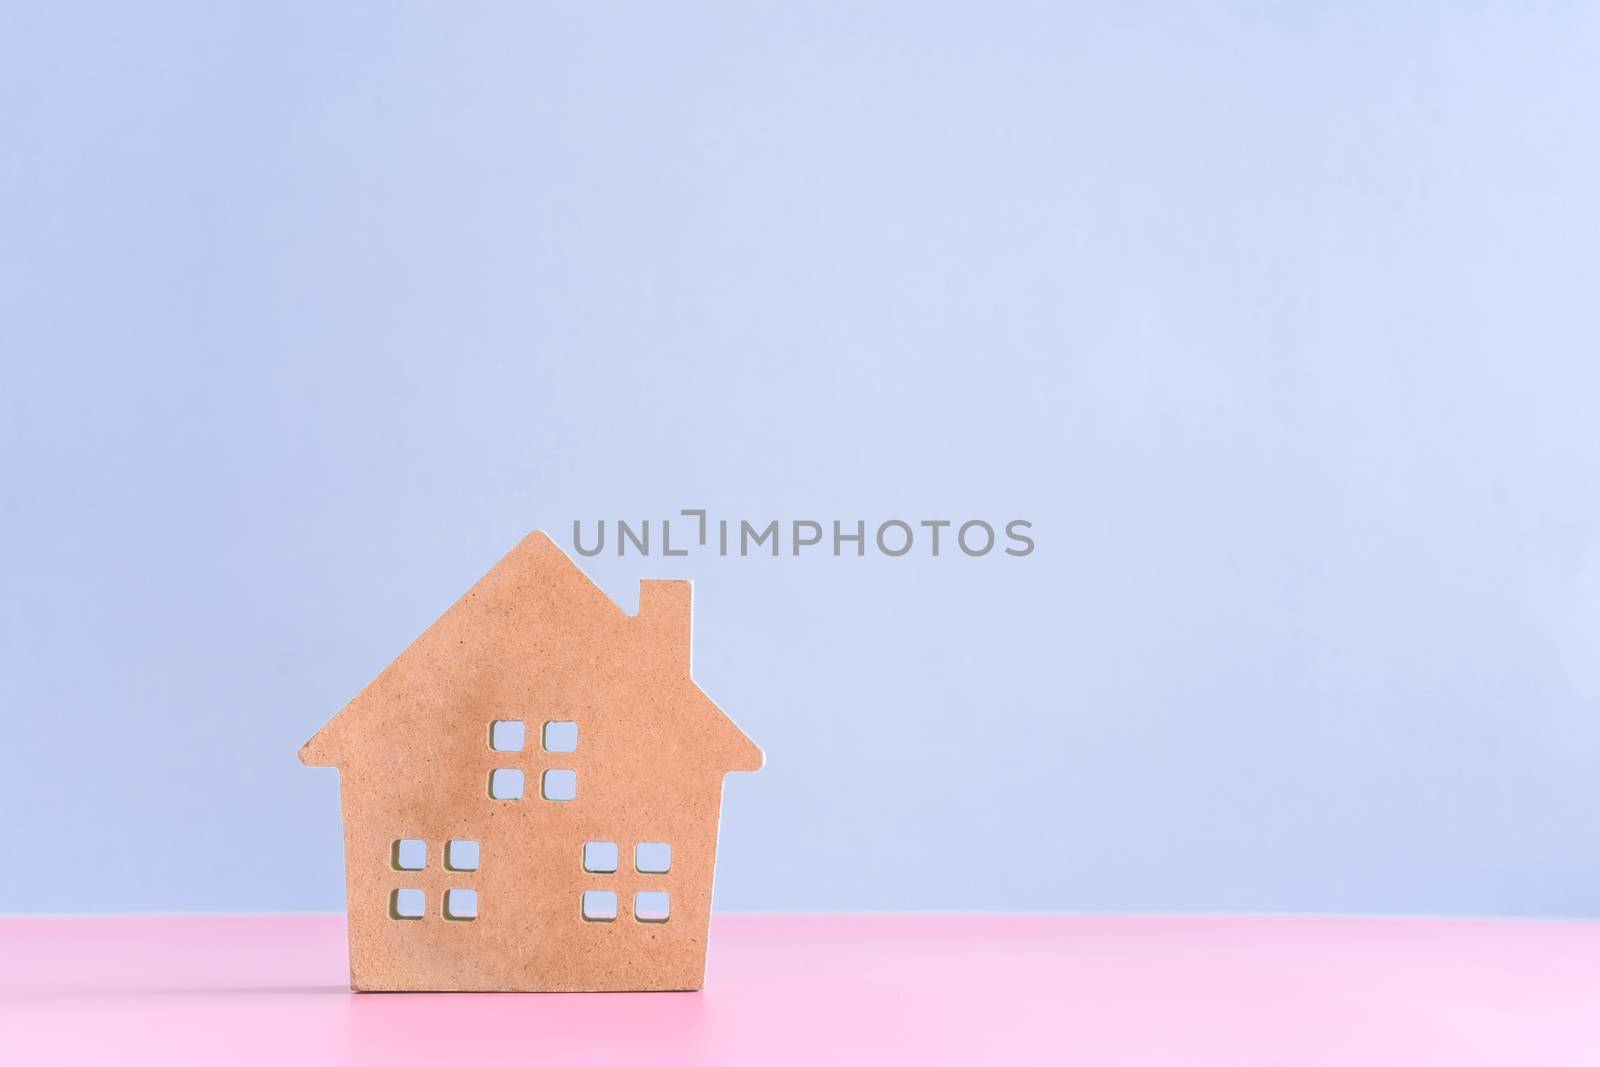 Home or house model in pastel color room background. Investment wealthy freedom life concept.